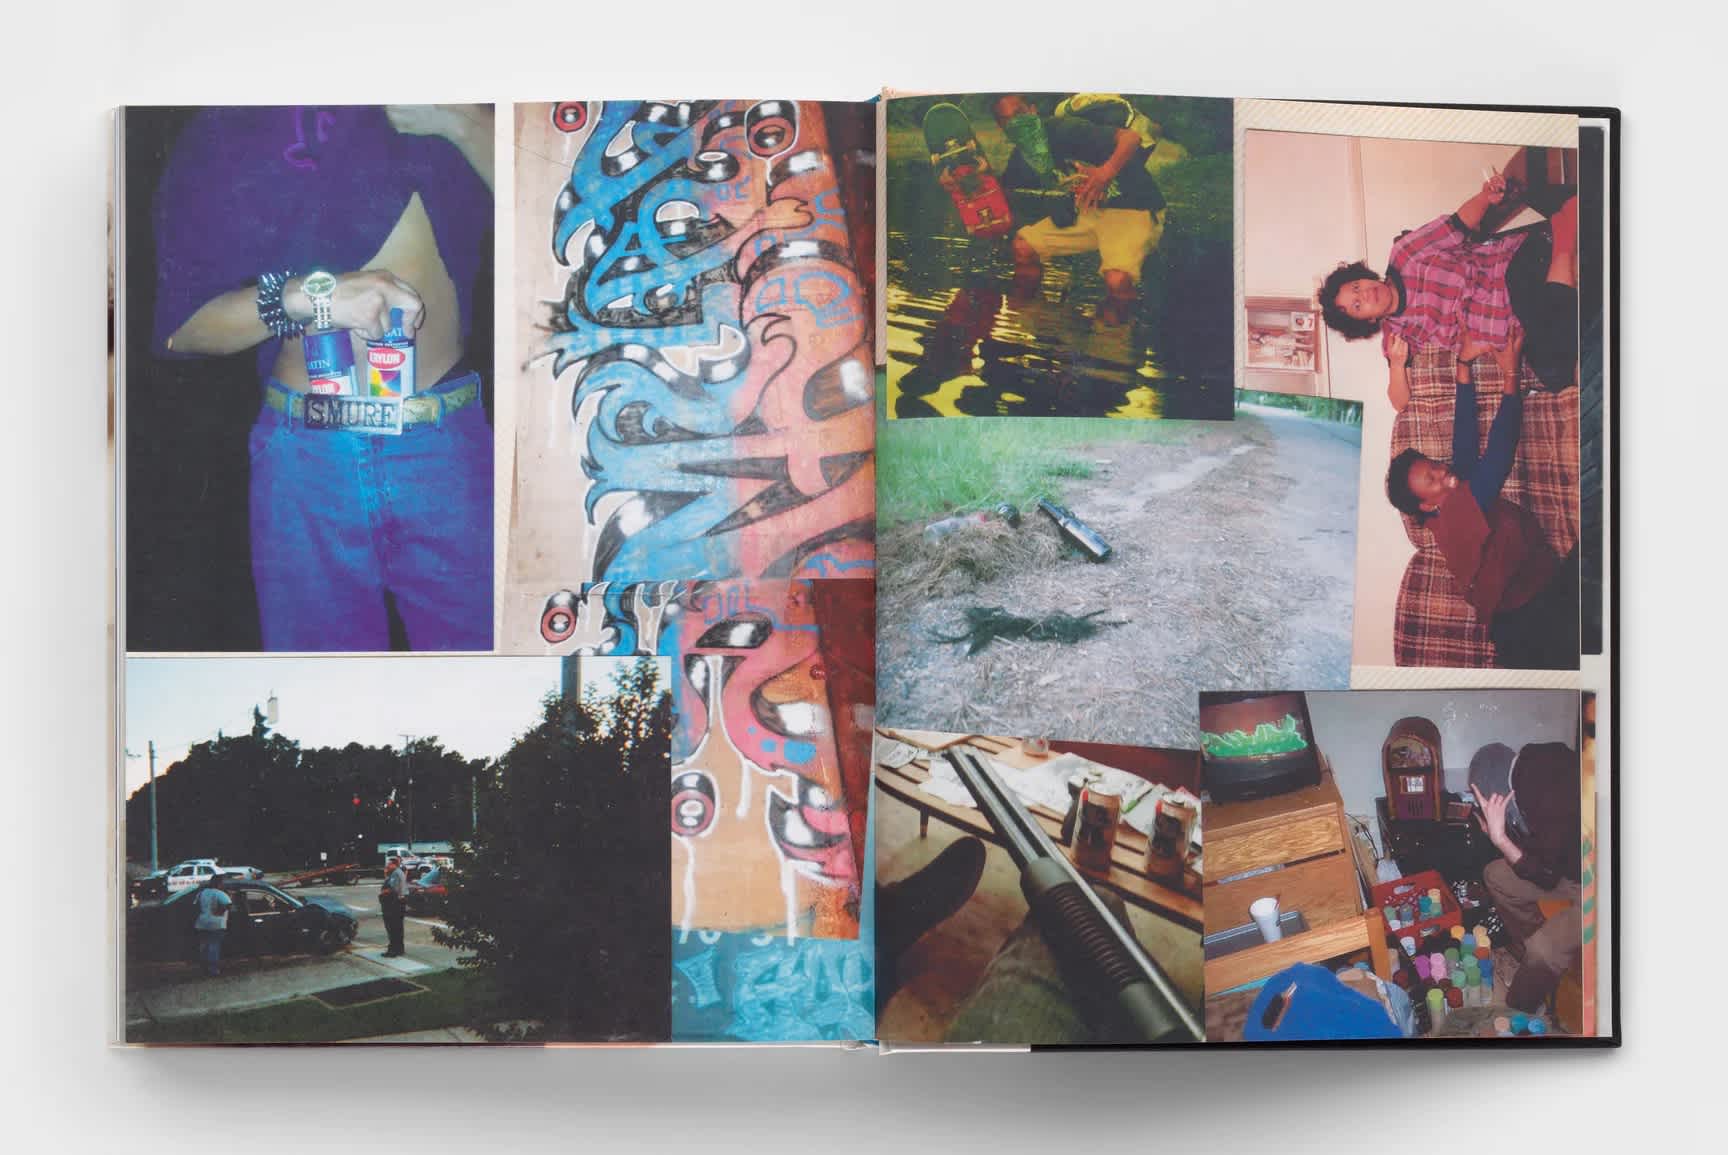 Book interior which features a collage of various images depicting graffiti, graffiti painting and house interiors and young kids partying.